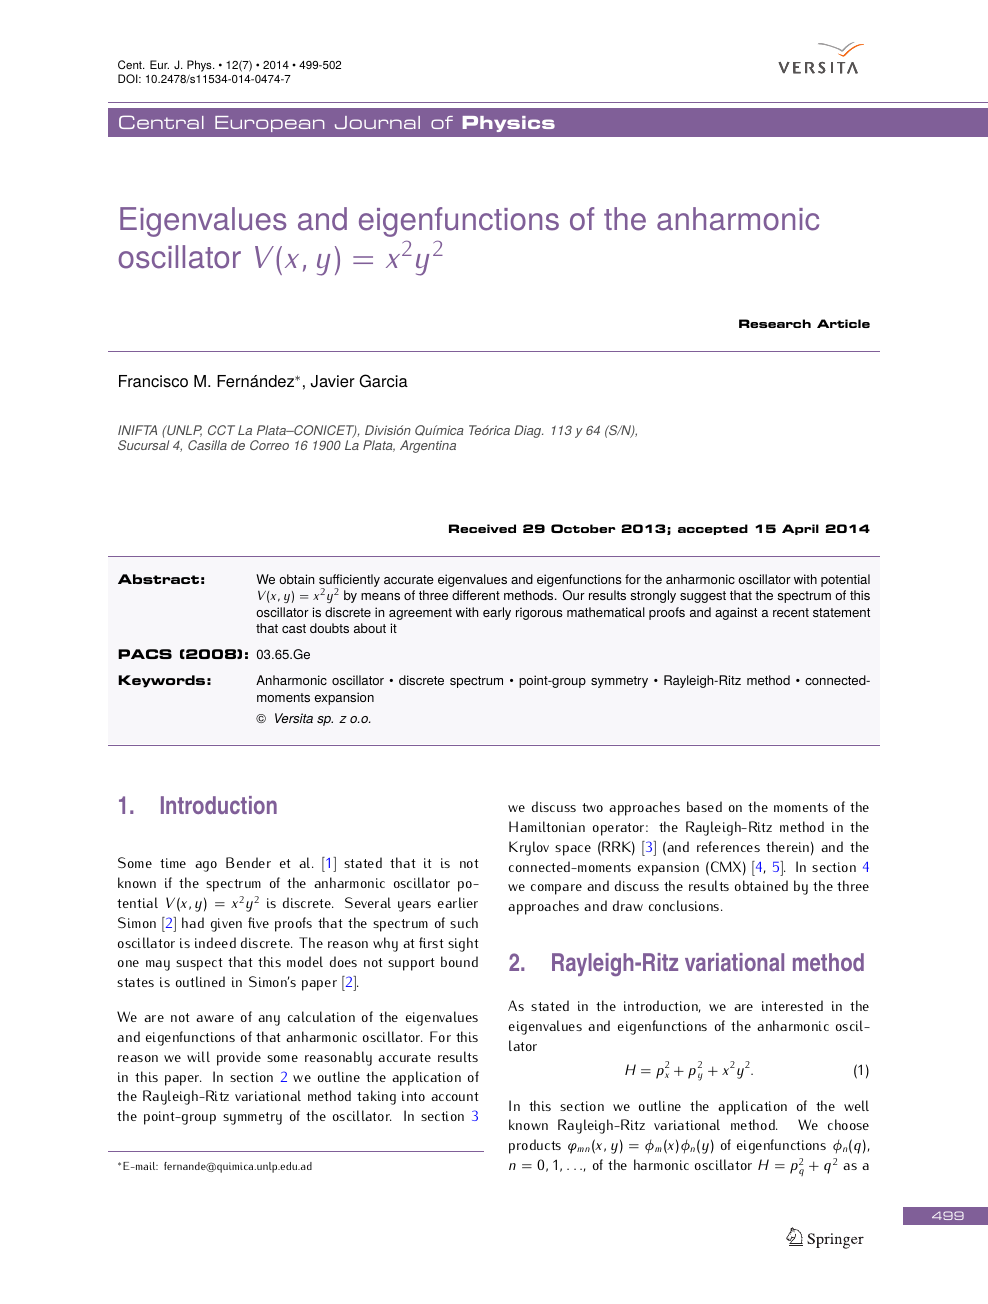 Eigenvalues And Eigenfunctions Of The Anharmonic Oscillator V X Y X 2 Y 2 Topic Of Research Paper In Physical Sciences Download Scholarly Article Pdf And Read For Free On Cyberleninka